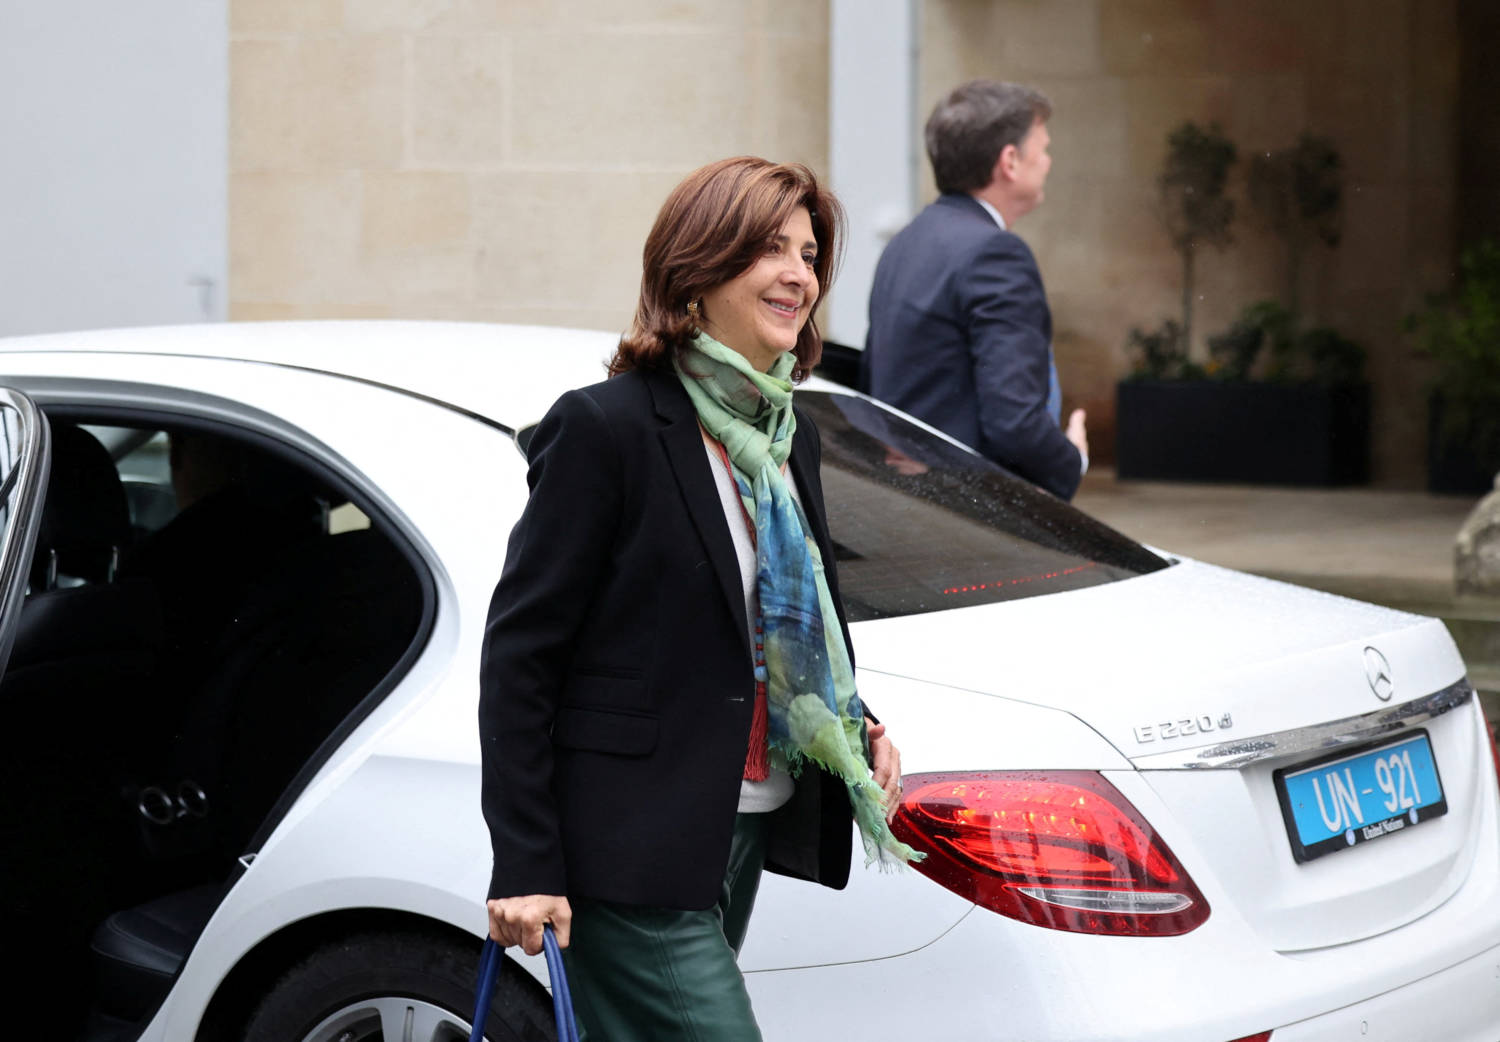 Un Envoy On Cyprus Maria Angela Holguin Cuellar Arrives At The Presidential Palace For A Meeting With Cypriot President Nikos Christodoulides In Nicosia